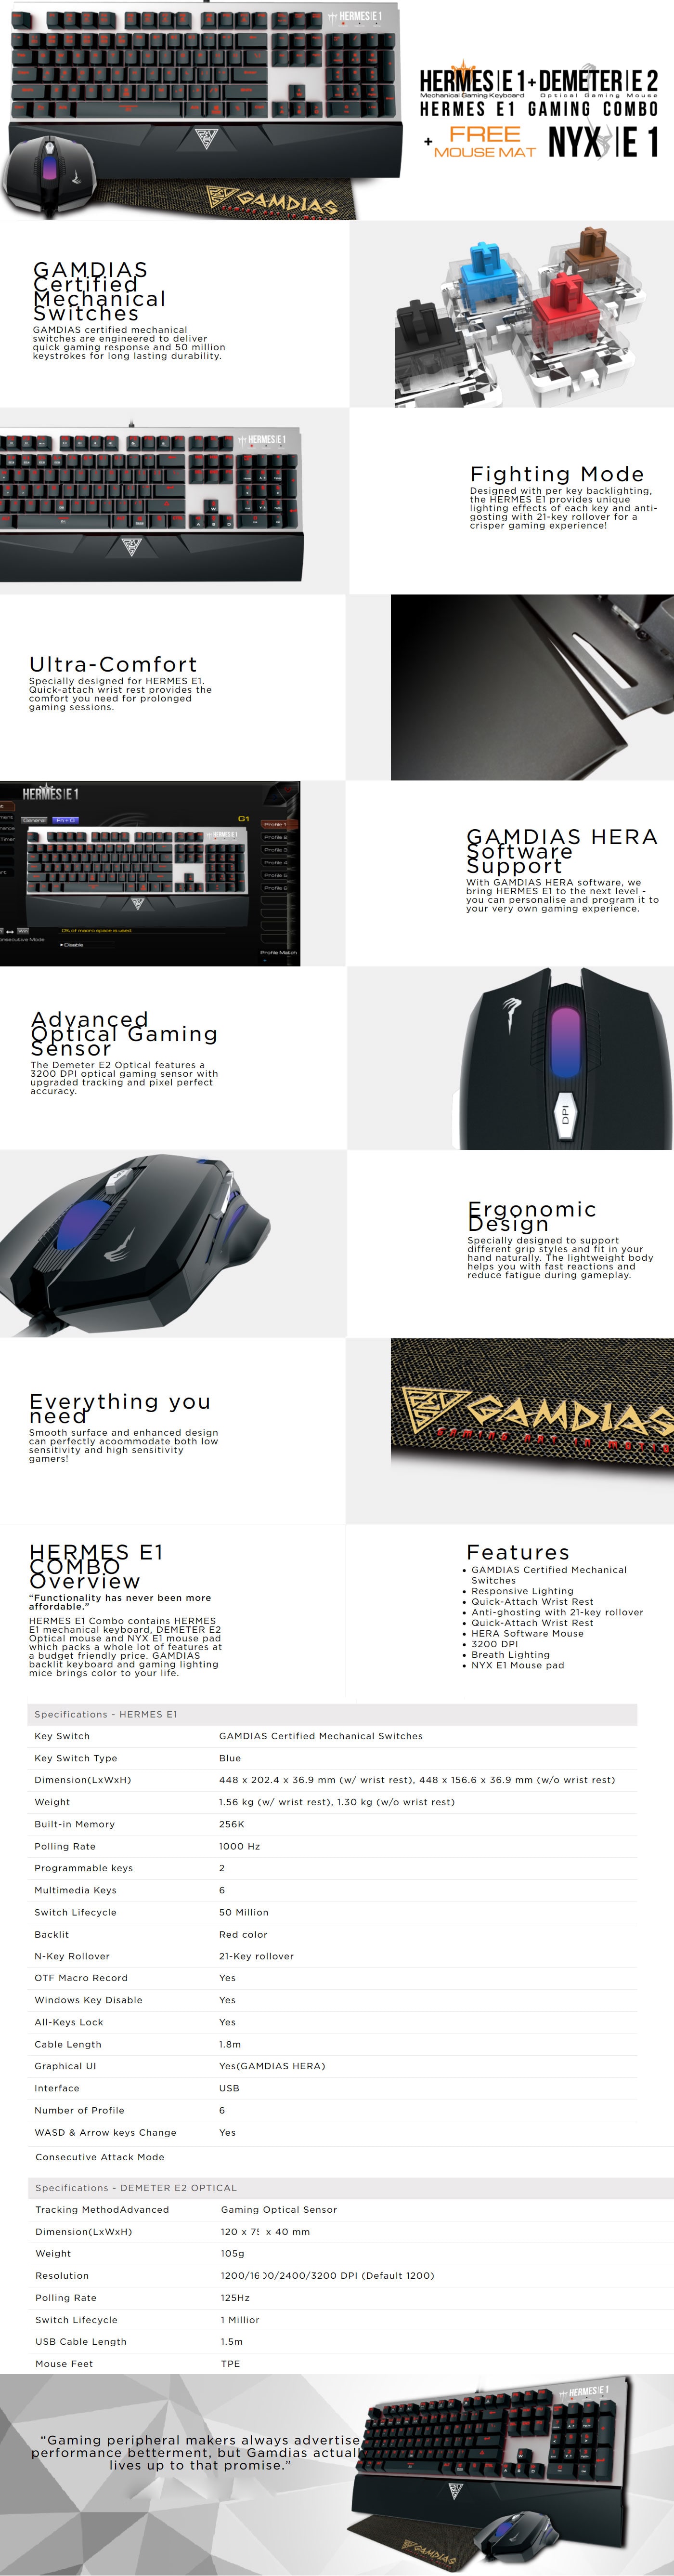 Gamdias Hermes E1 Mechanical Keyboad & Demeter E2 Mouse & Mosue Pad Combo features